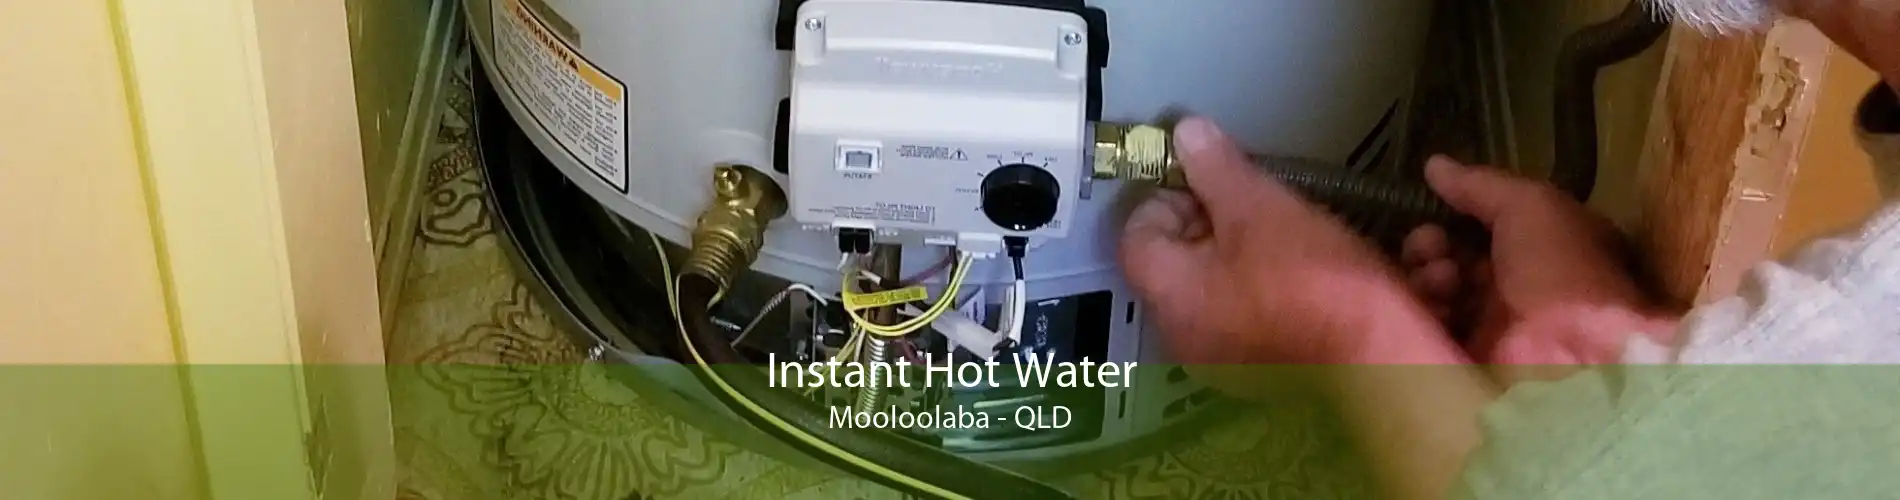 Instant Hot Water Mooloolaba - QLD